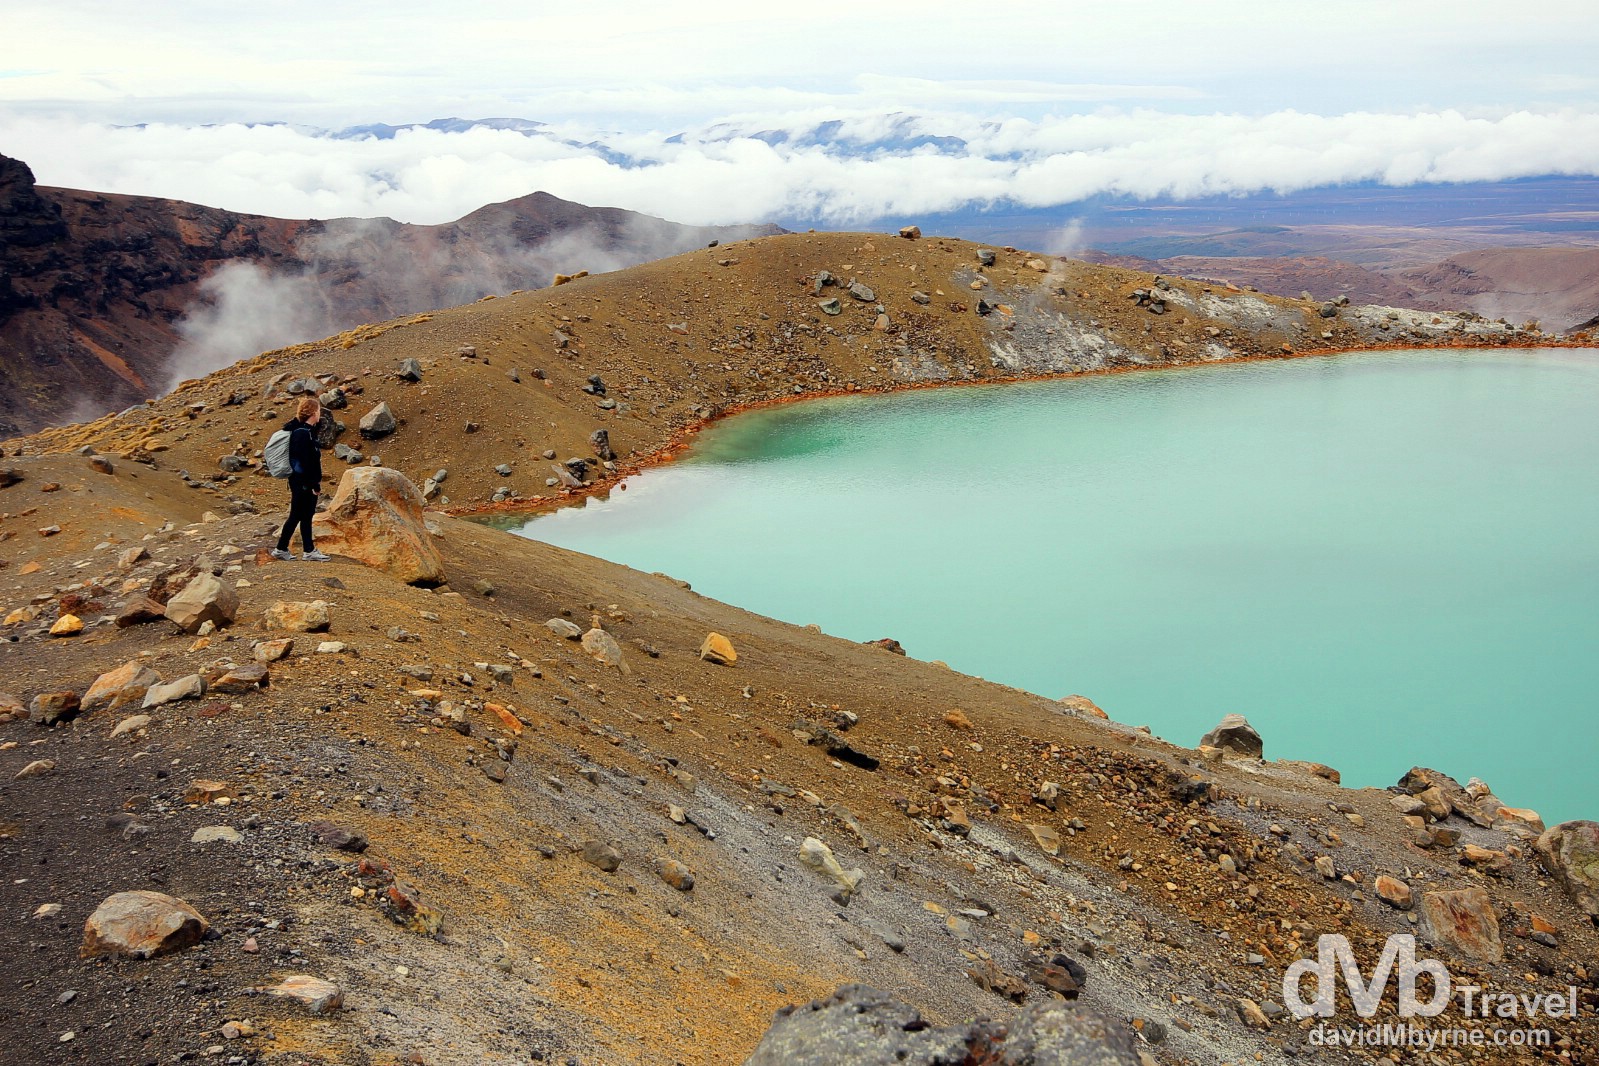 Standing by an emerald green volcanic lake in Tongariro National Park, North Island, New Zealand. May 9th 2012.